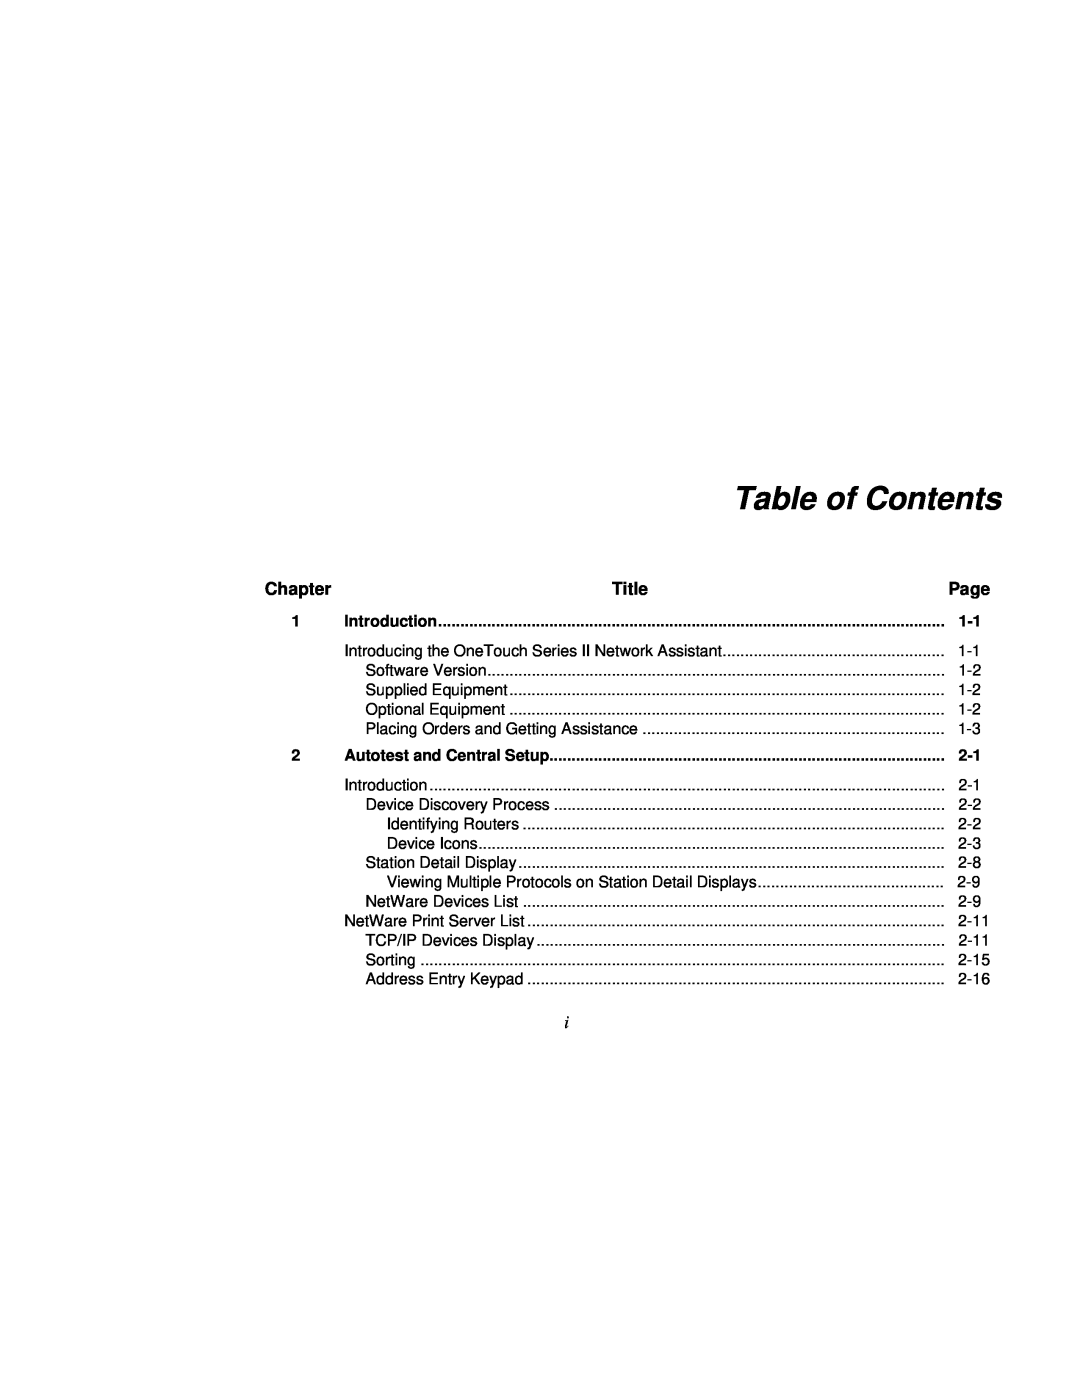 Fluke Series II user manual Table of Contents, Chapter, Title, Page, Introduction, Autotest and Central Setup 